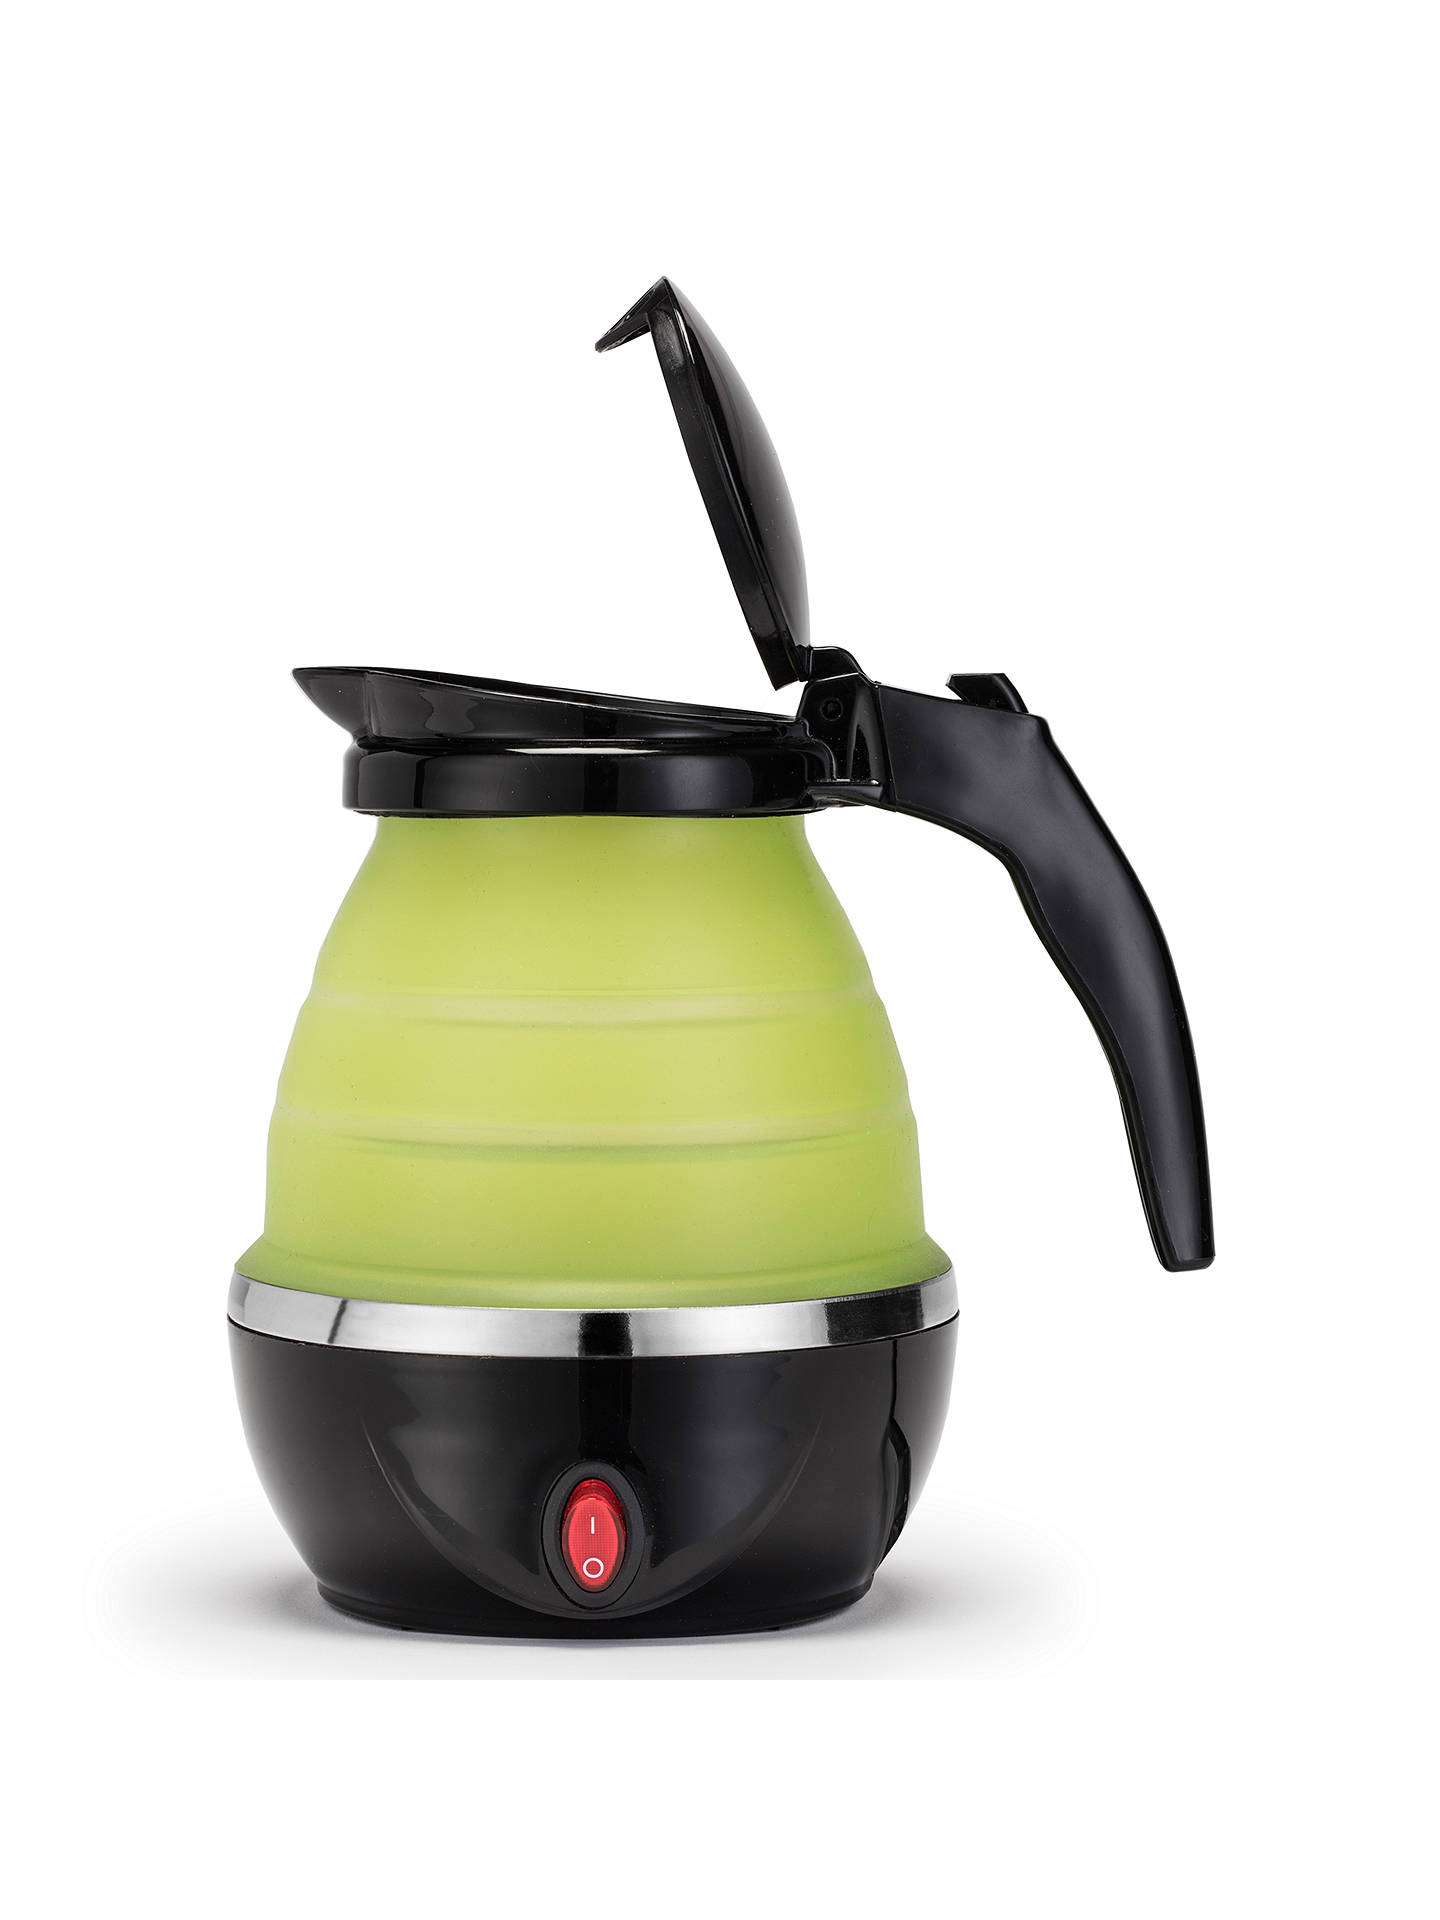 Collapsible kettle reviews